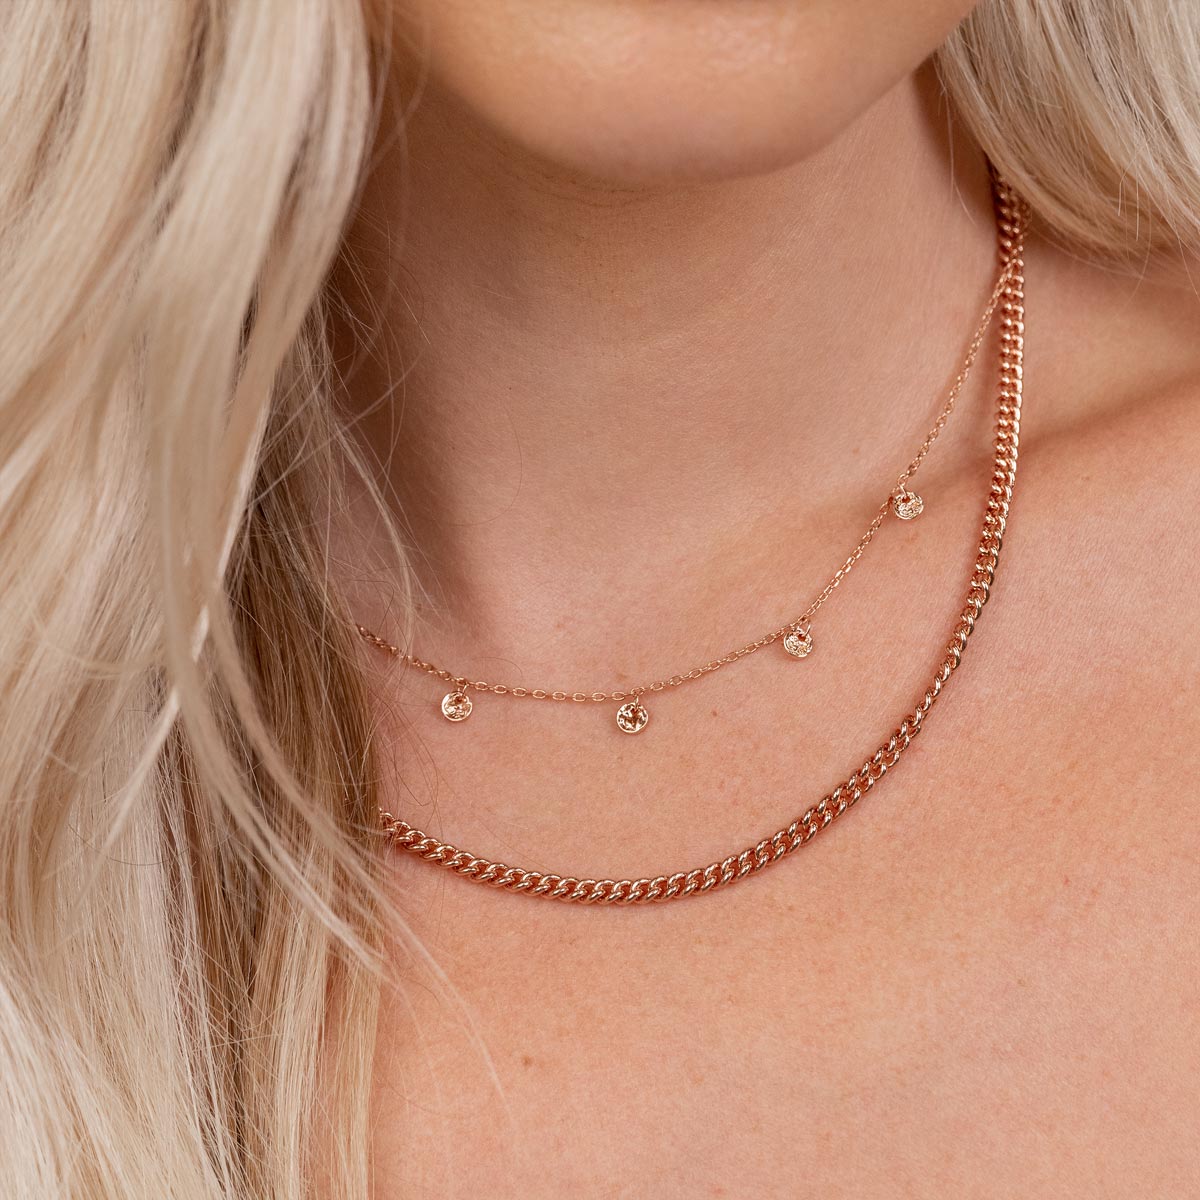 Dainty rose gold stacked necklaces